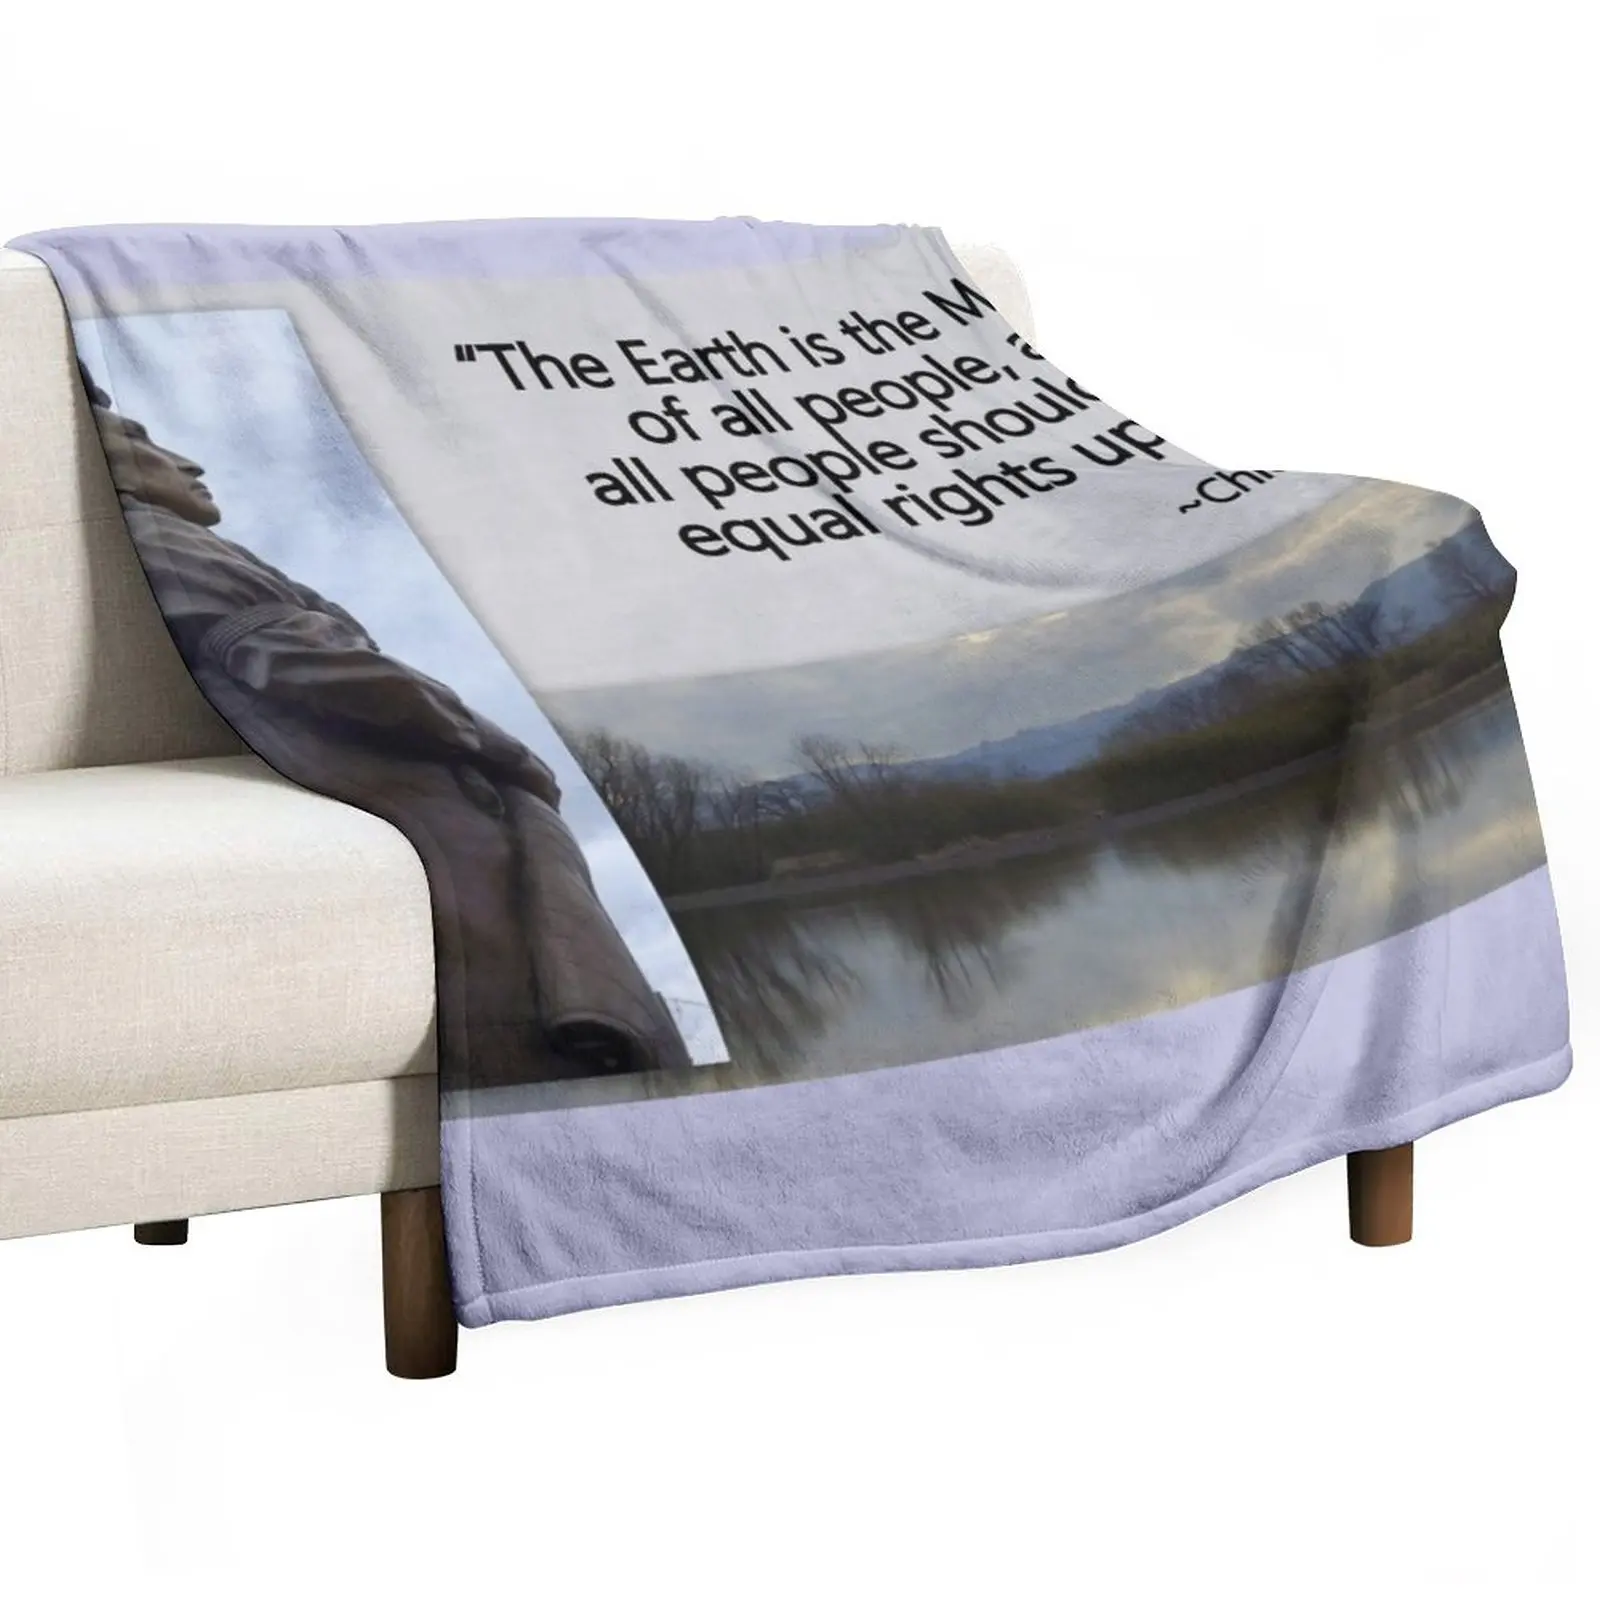 

Chief Joseph Quote Collage Throw Blanket Sofas Decoratives Flannels Blankets